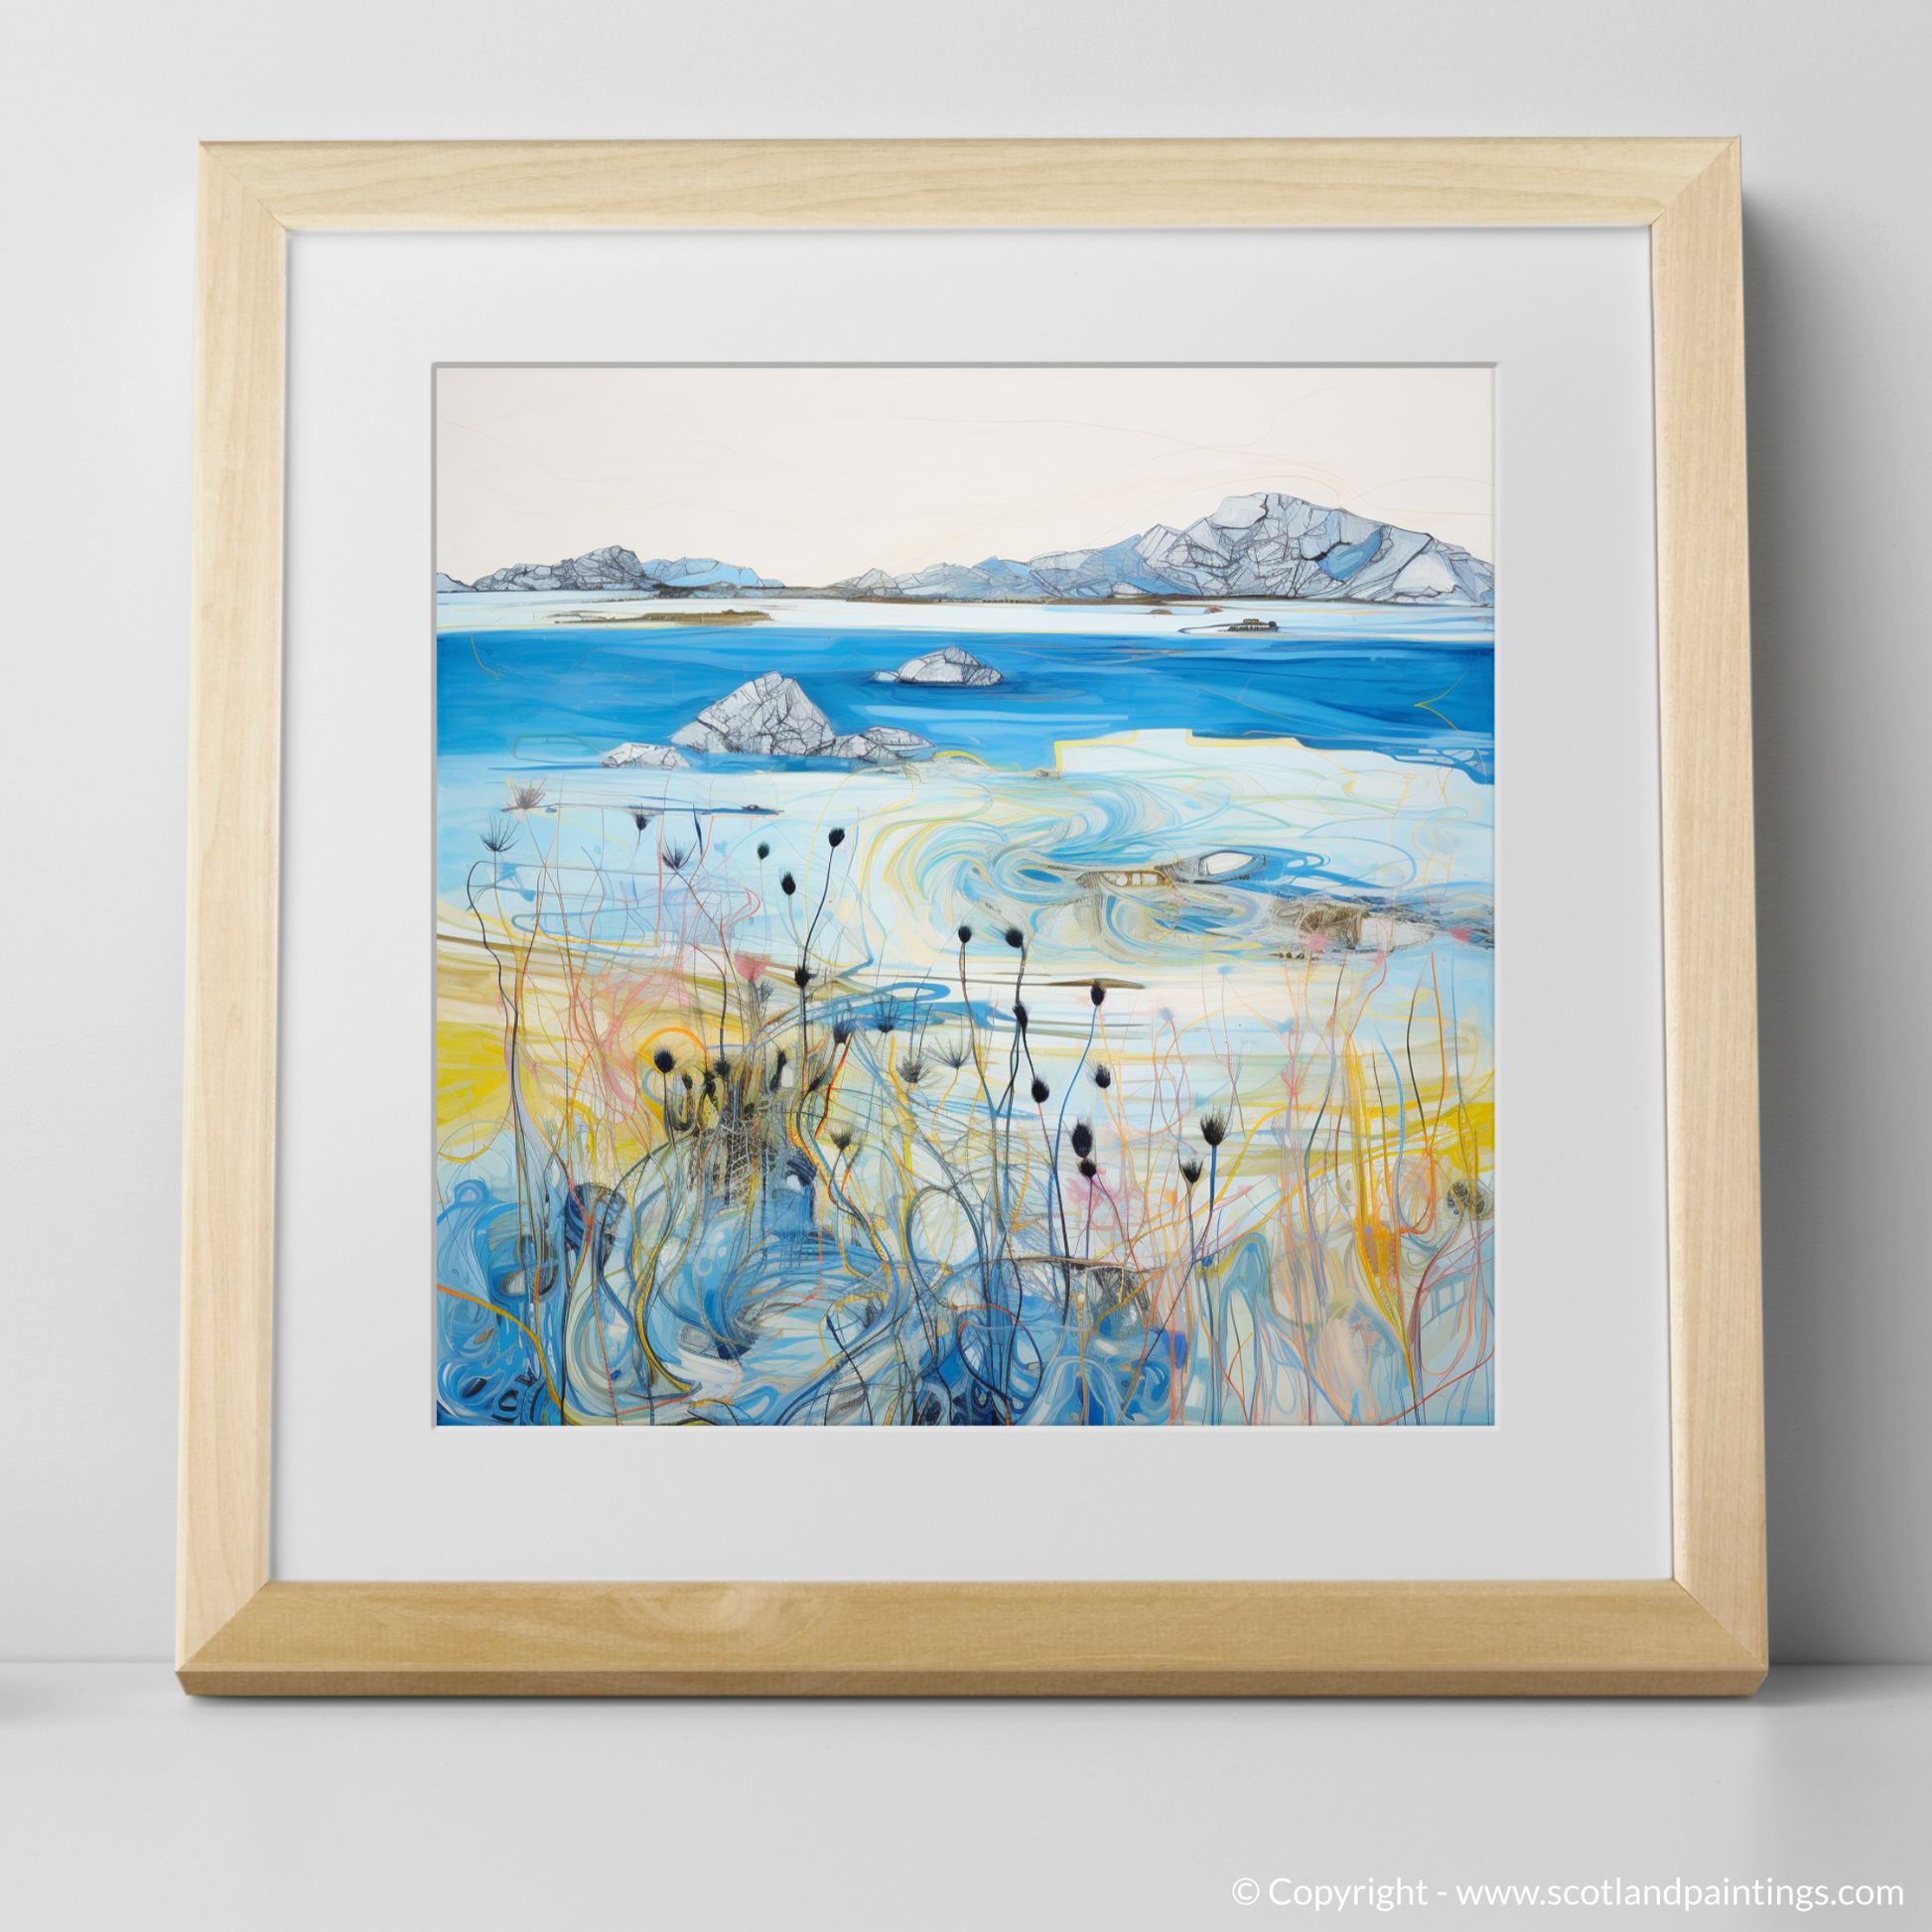 Art Print of Isle of Barra with a natural frame